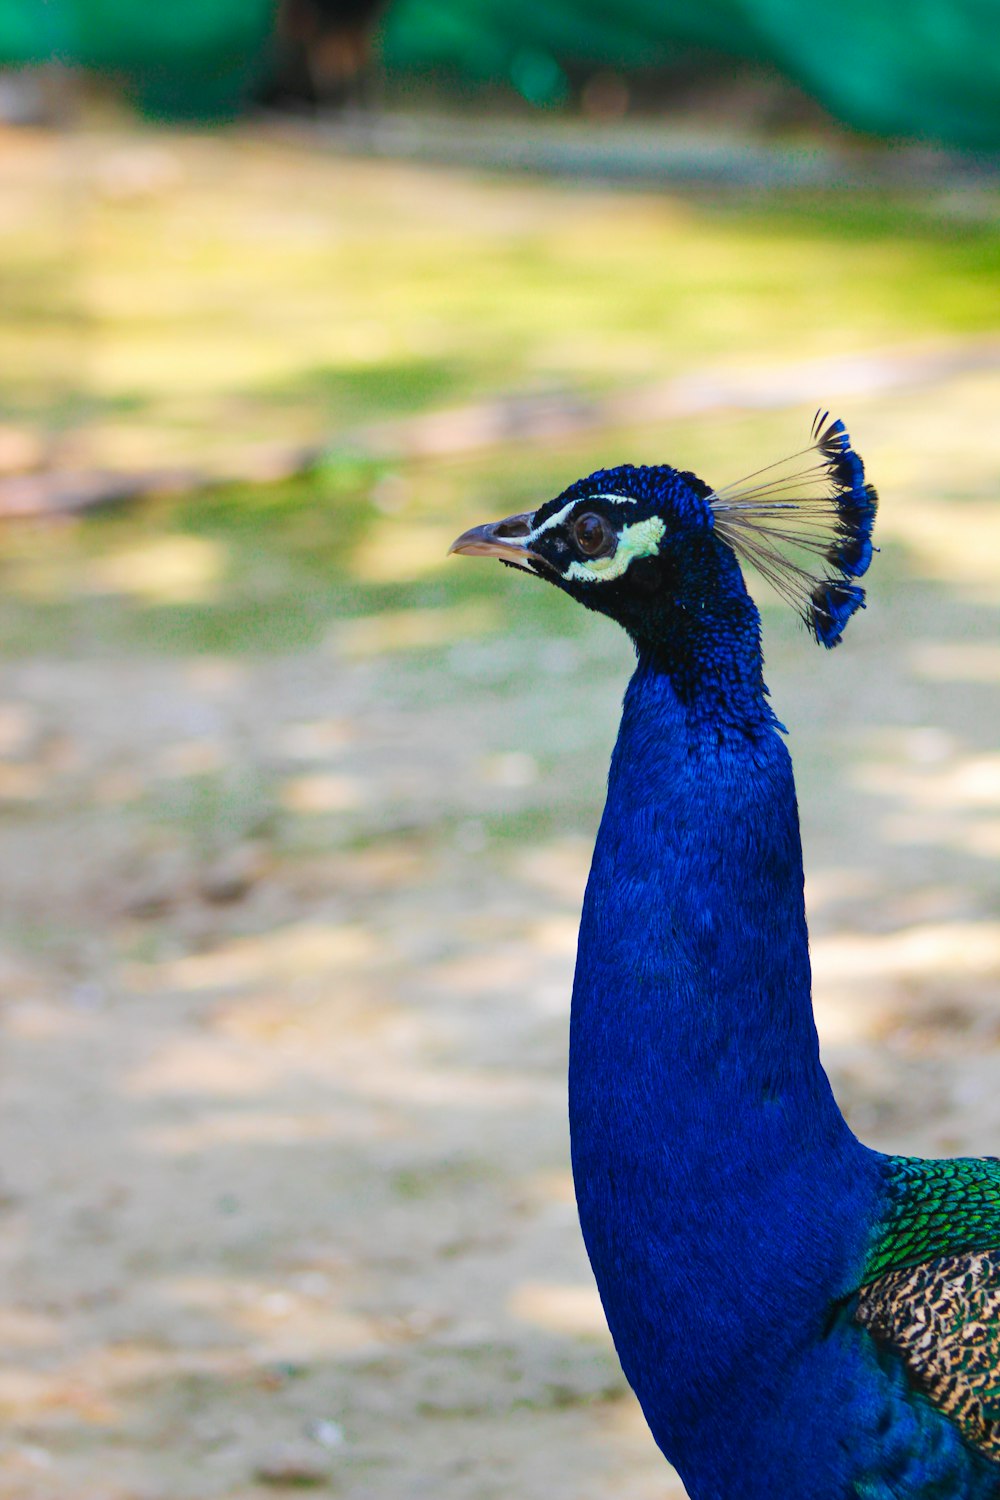 a blue peacock standing on top of a dirt field